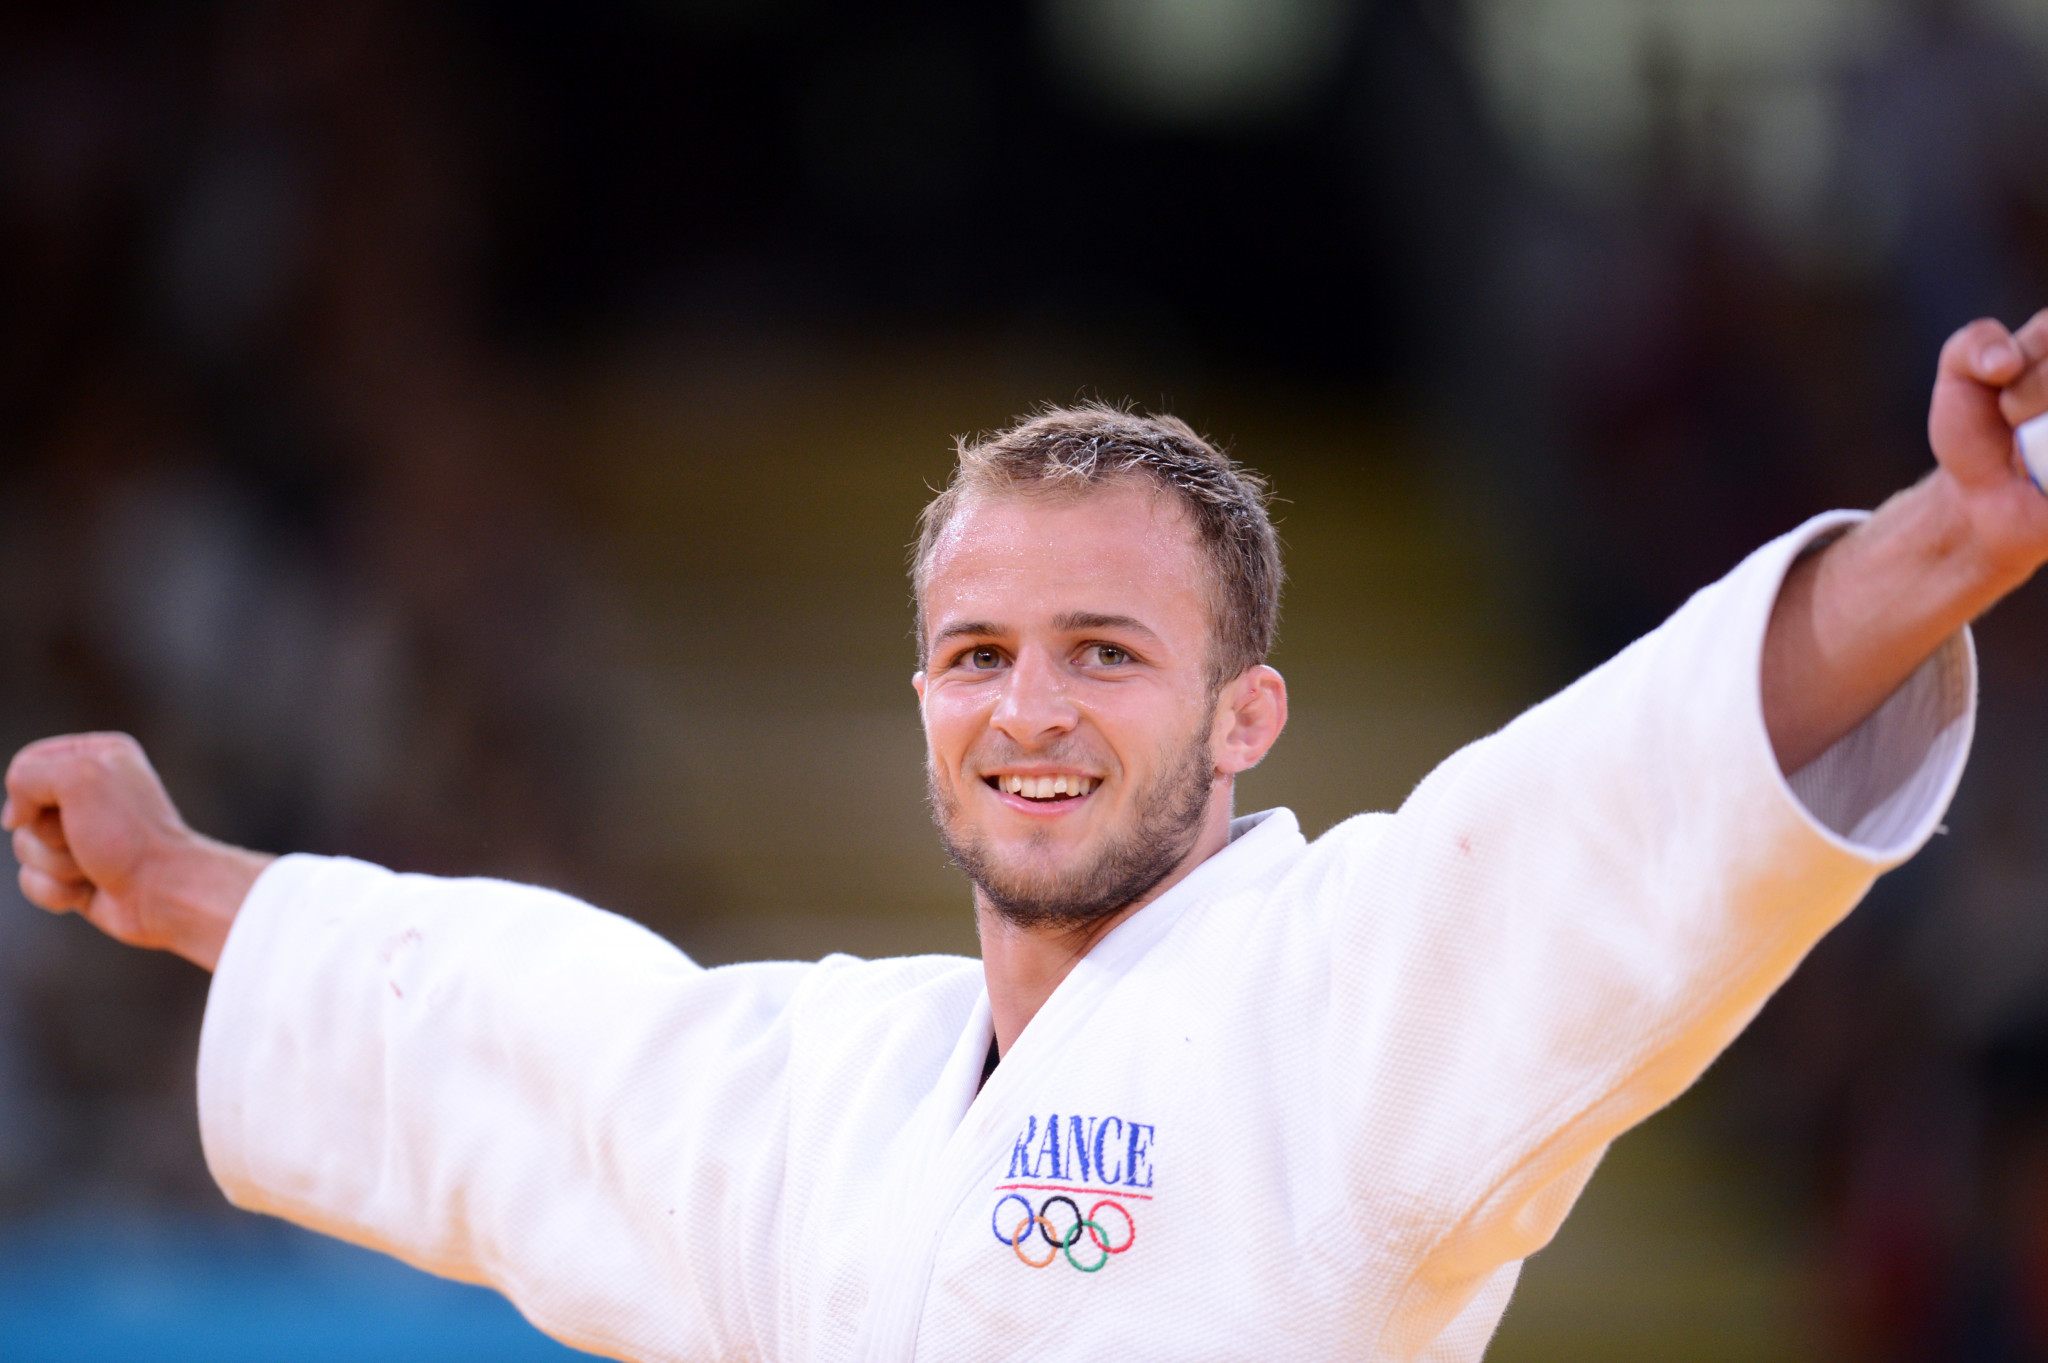 Olympic judo medallist Legrand latest French athlete lured out of retirement by Paris 2024